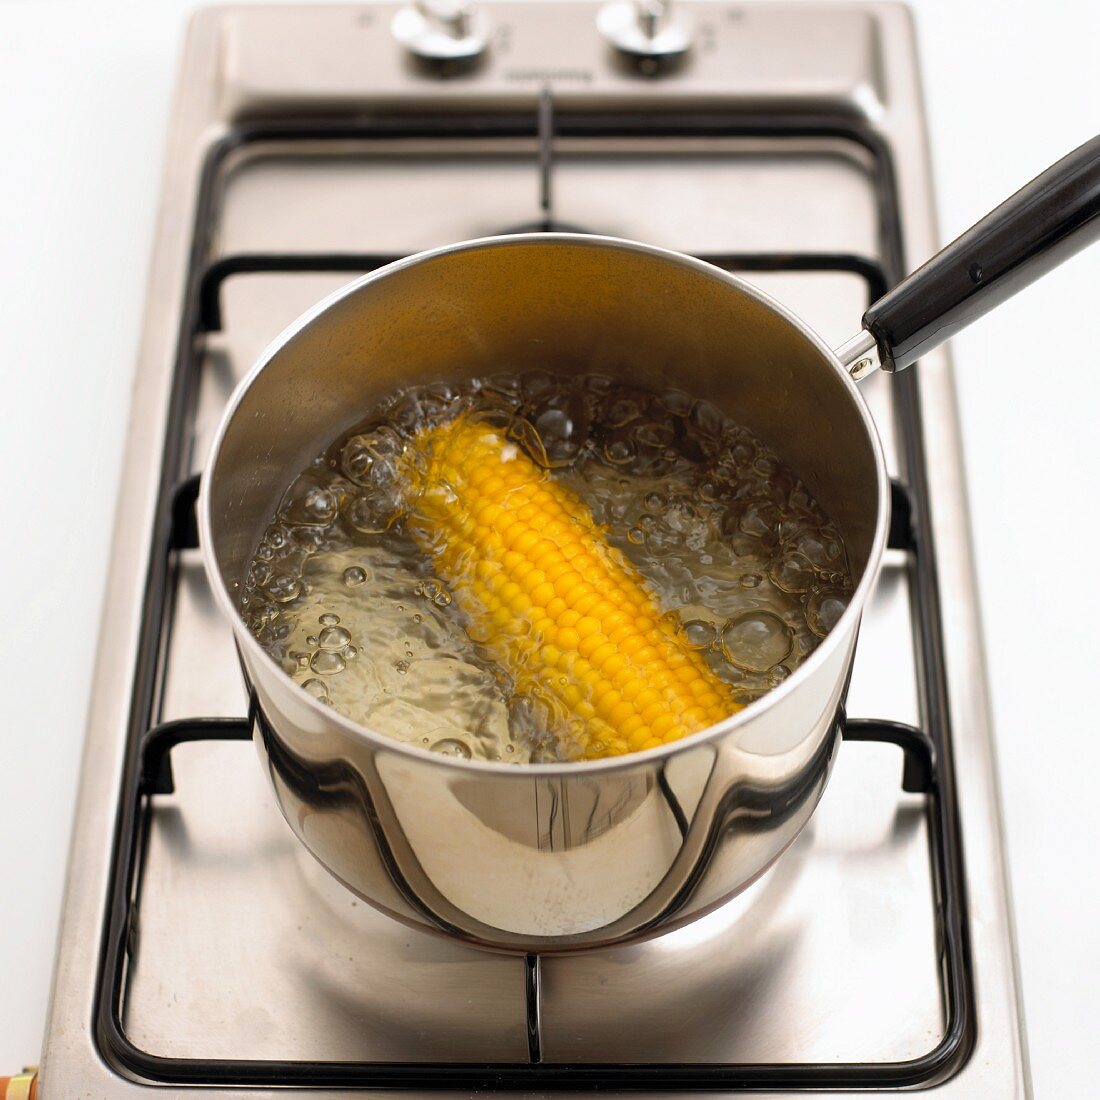 A corn cob being boiled